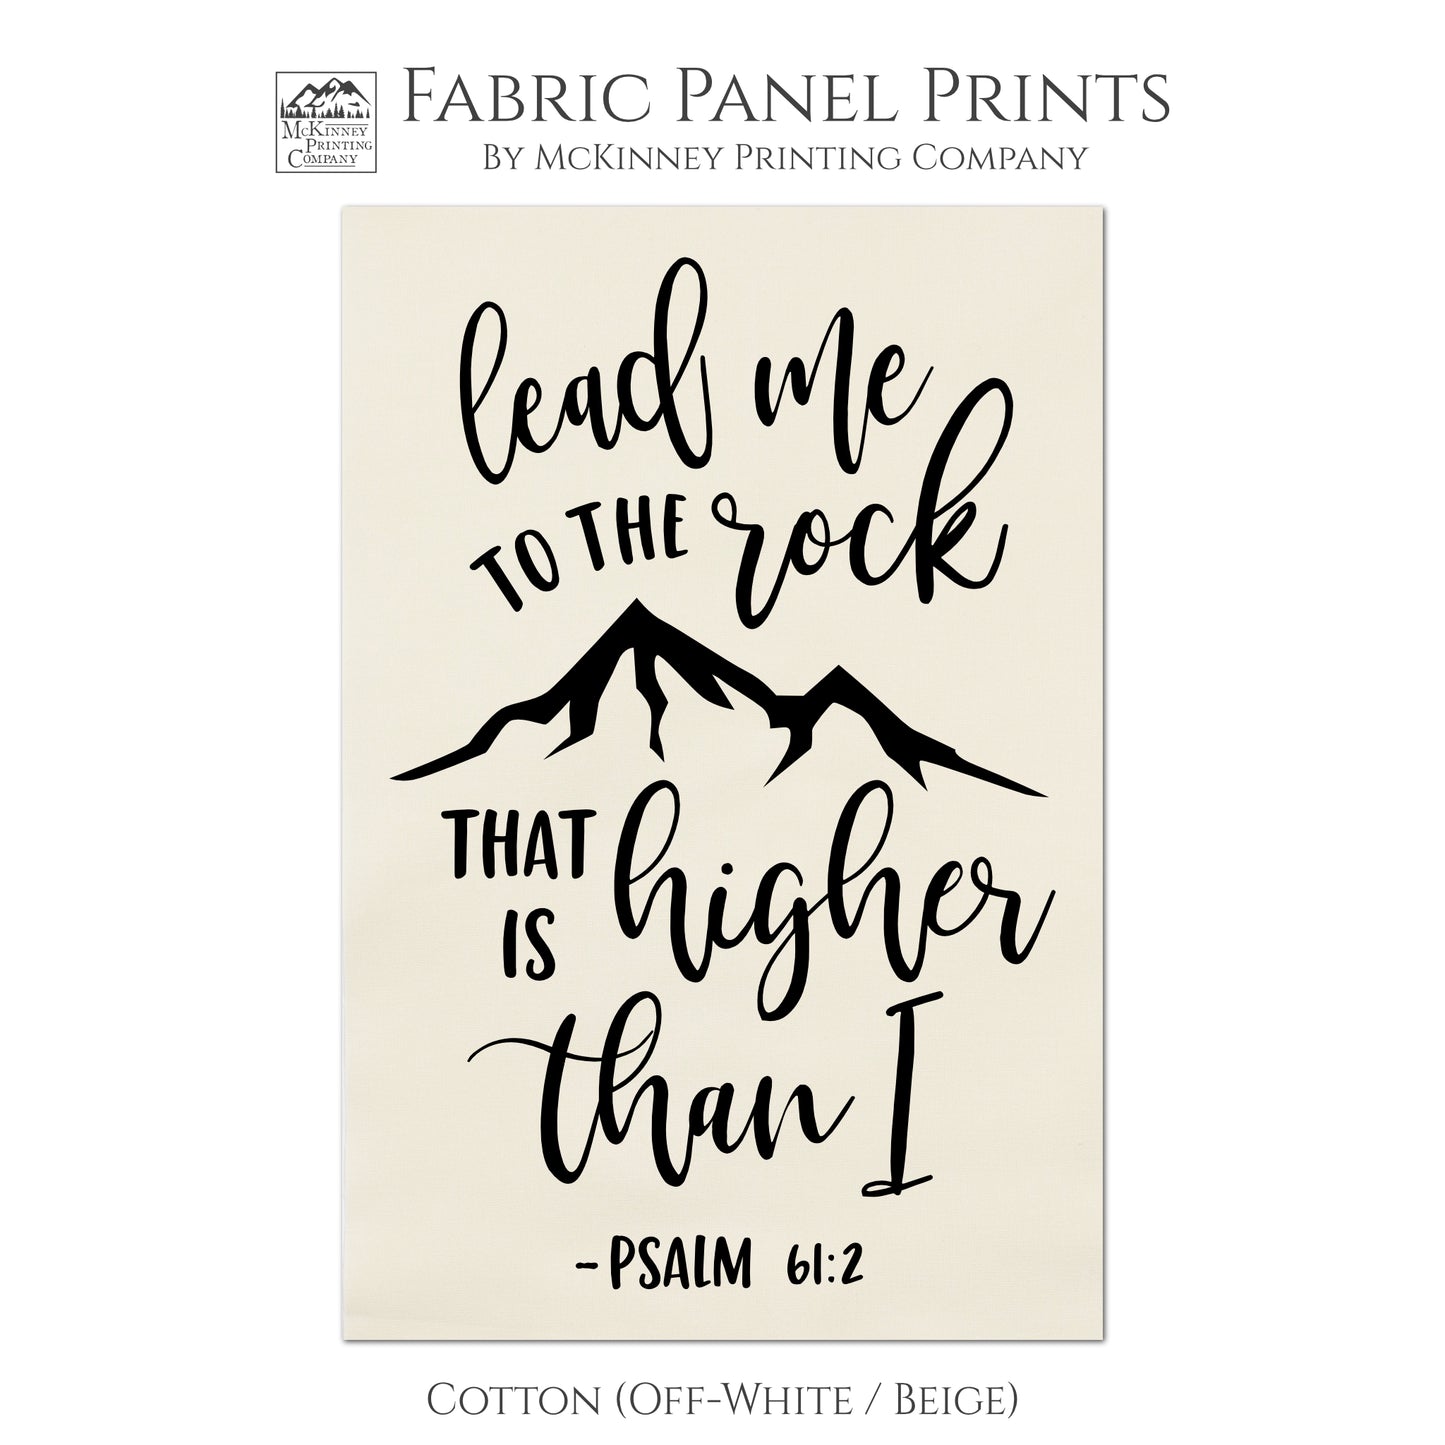 Lead me to the rock that is higher than I - Psalm 61 2, Scripture Fabric, Bible Verse Wall Art, Fabric Panel Print, Large Print Quilt Block - Cotton